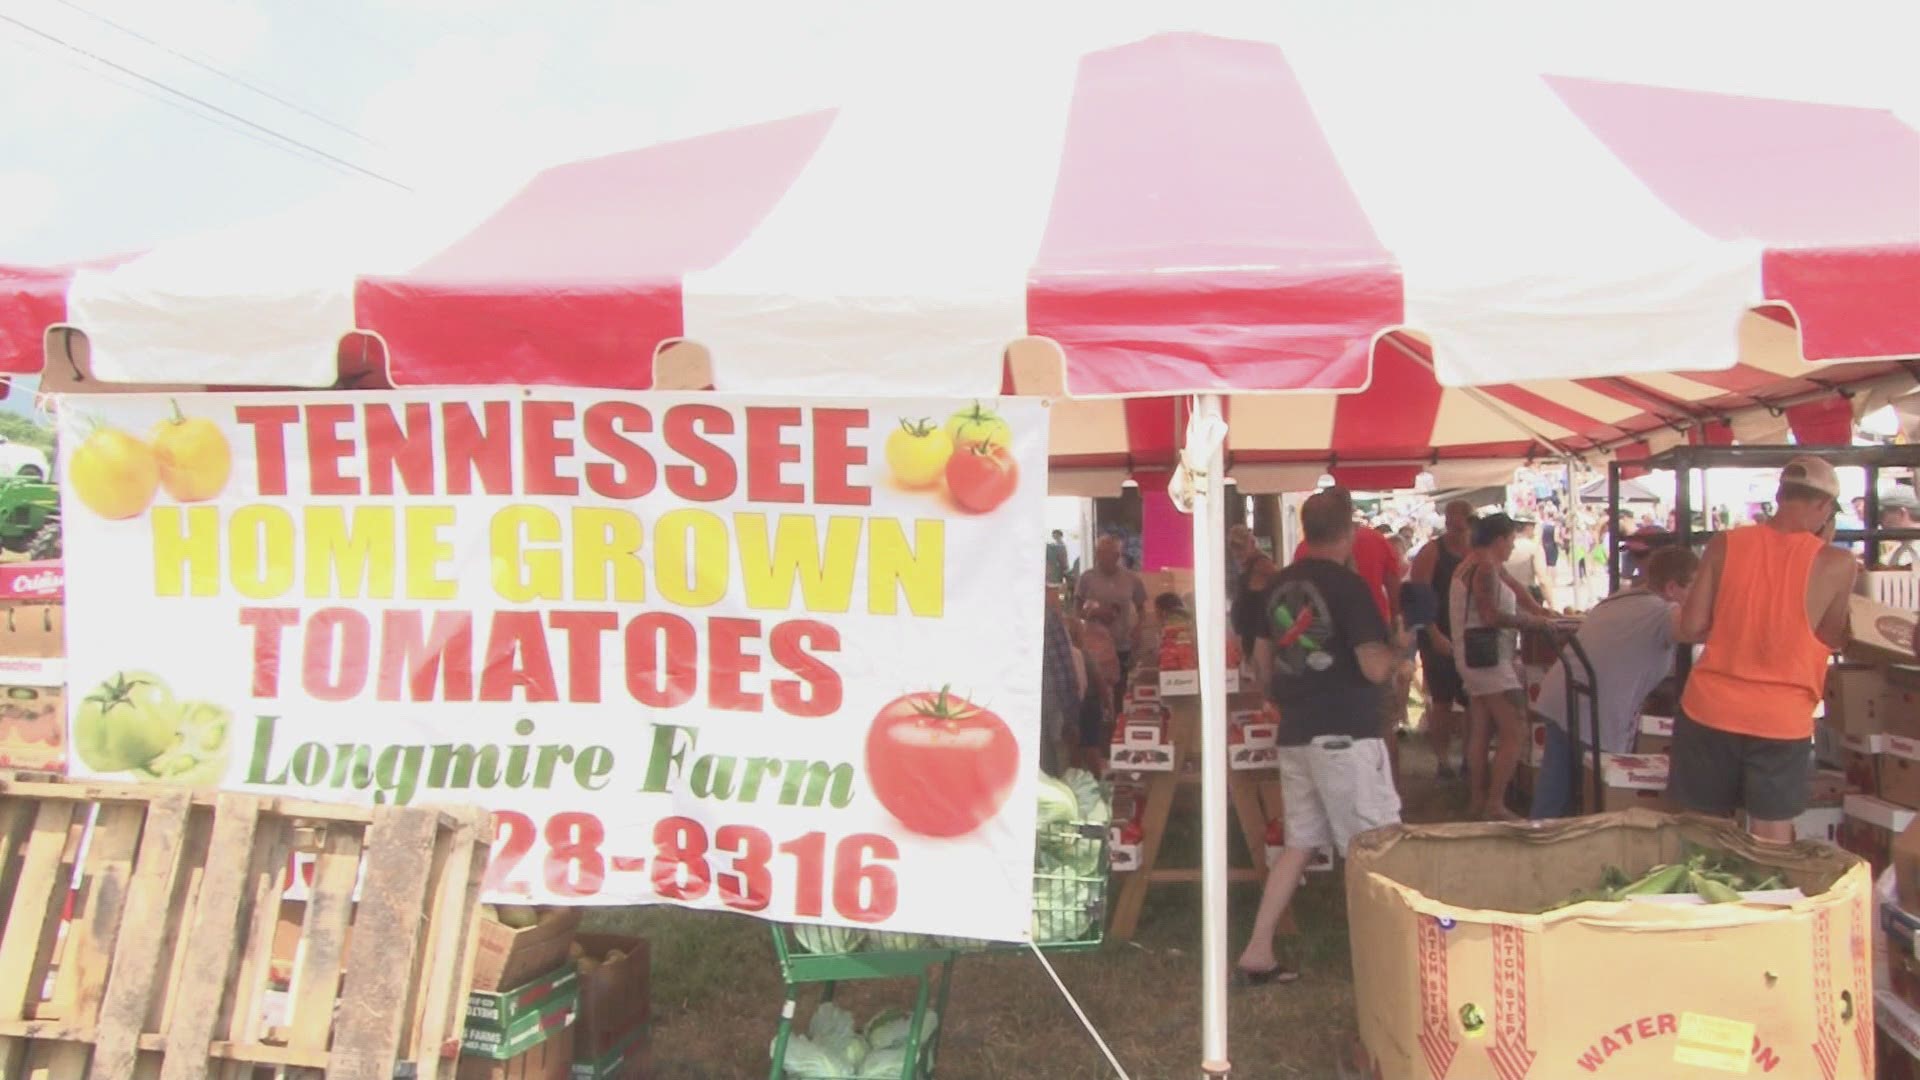 The Grainger County tomatoes were ripe and ready for the famous tomato festival in Rutledge.